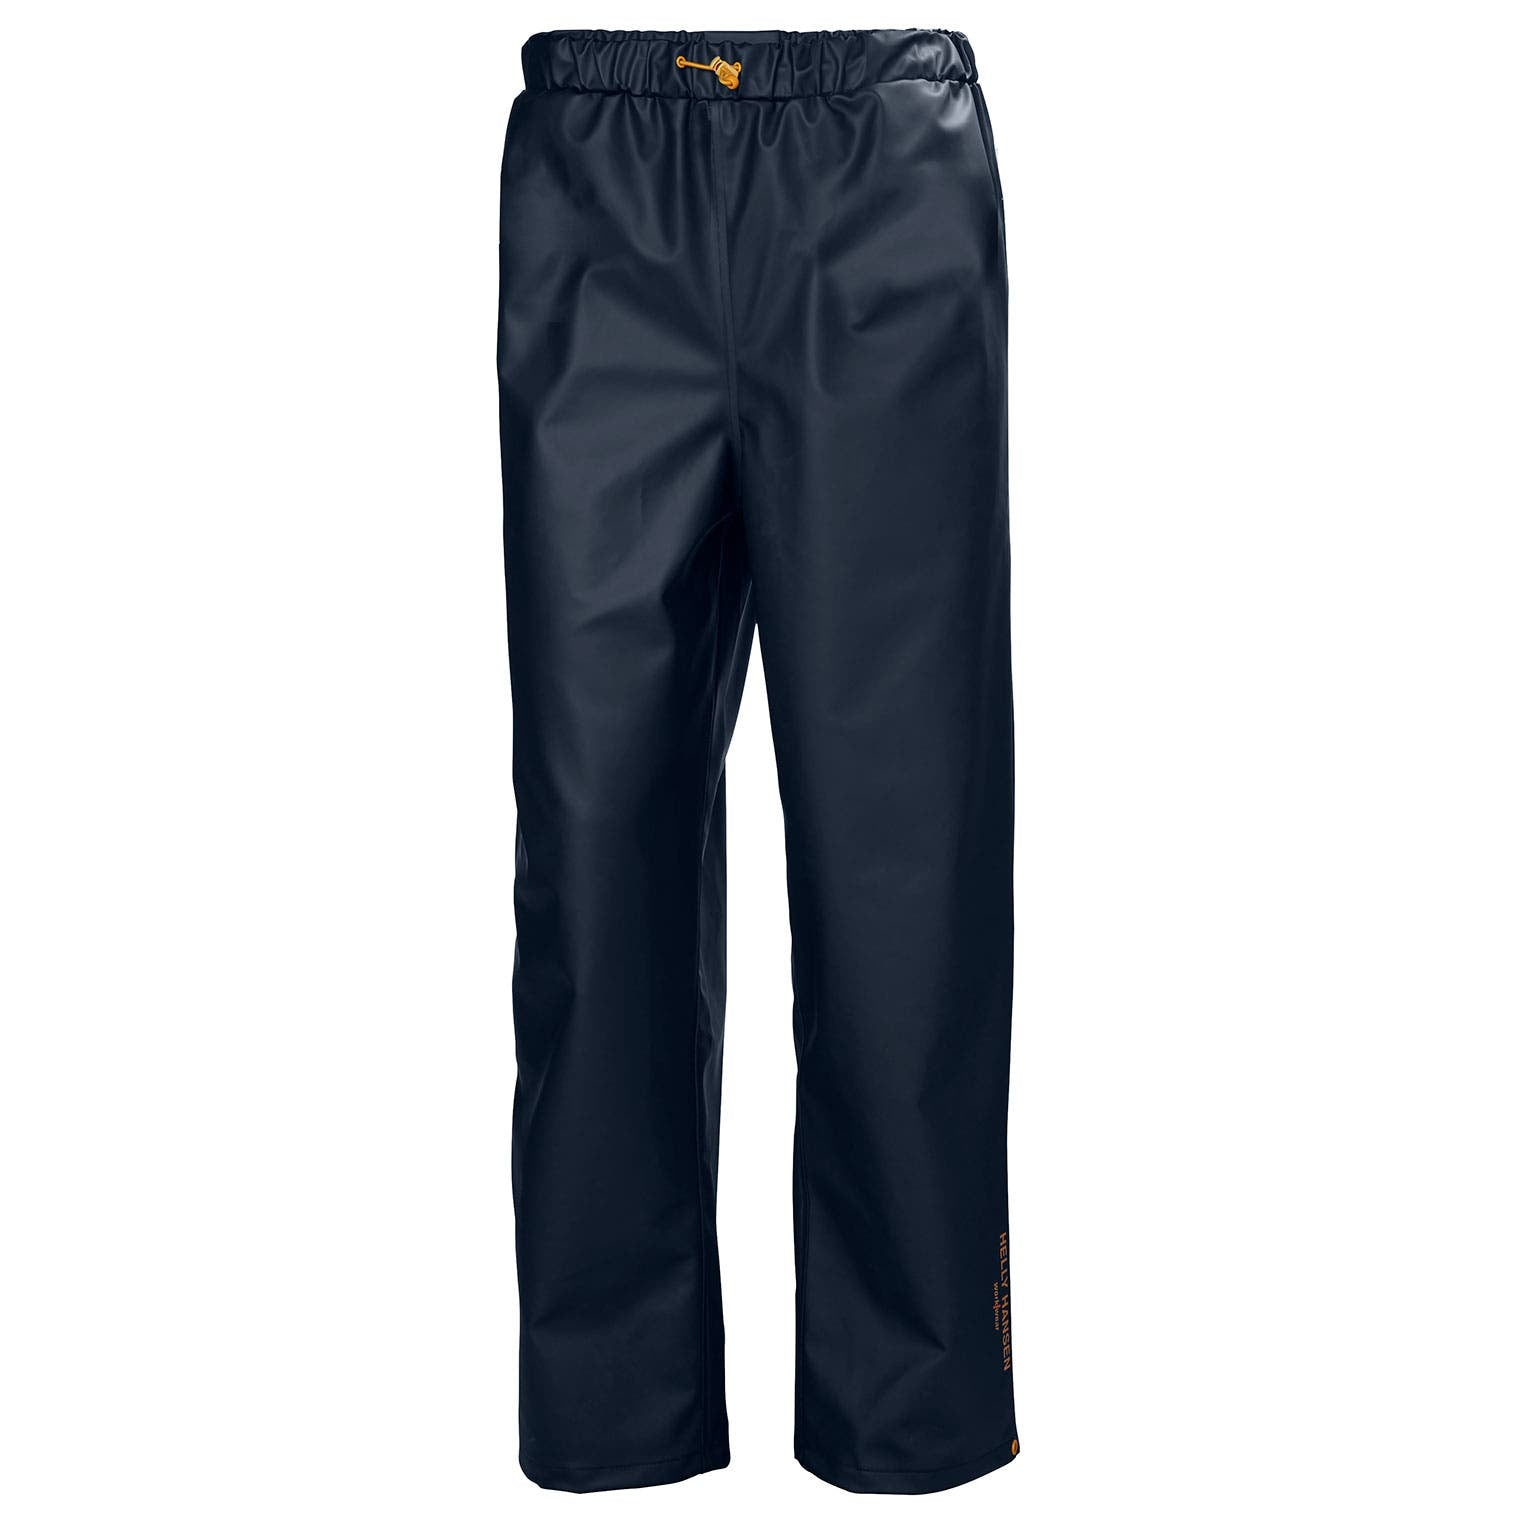 Helly Hansen Men's Gale Rain Pant in Navy from the front